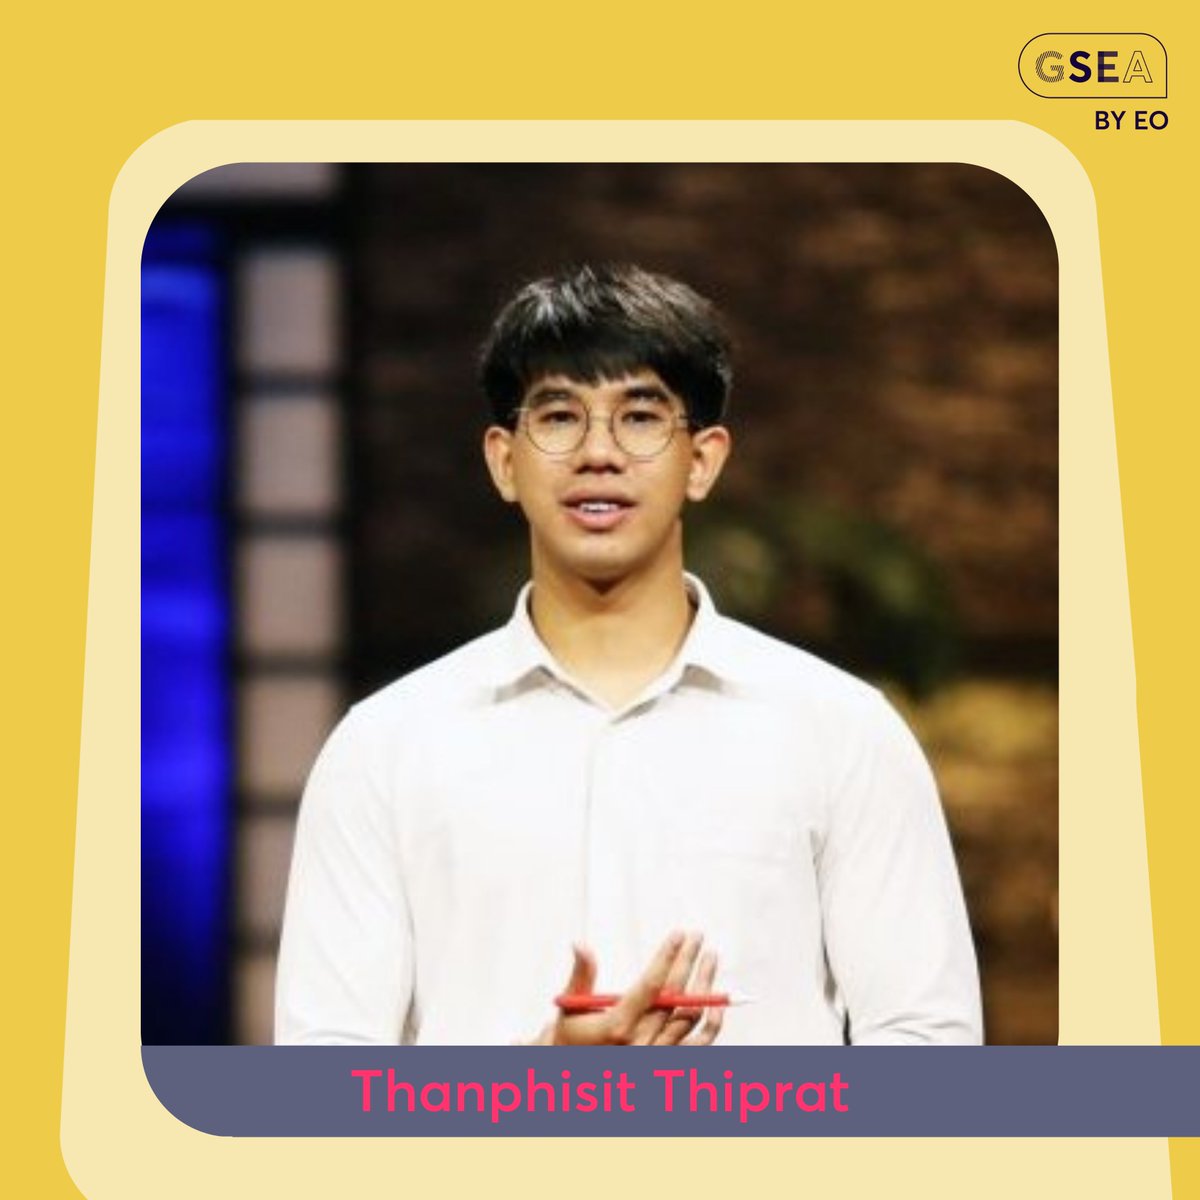 🌟 Get ready to meet Thanphisit Thiprat, the winner of EO Thailand GSEA! 🏆 Thanphisit's venture, THANIIE Tiny House, is making waves by introducing mobile homes to Thailand. 🏡 With a focus on sustainability and eco-friendly living, he is reshaping the future of housing. #GSEA